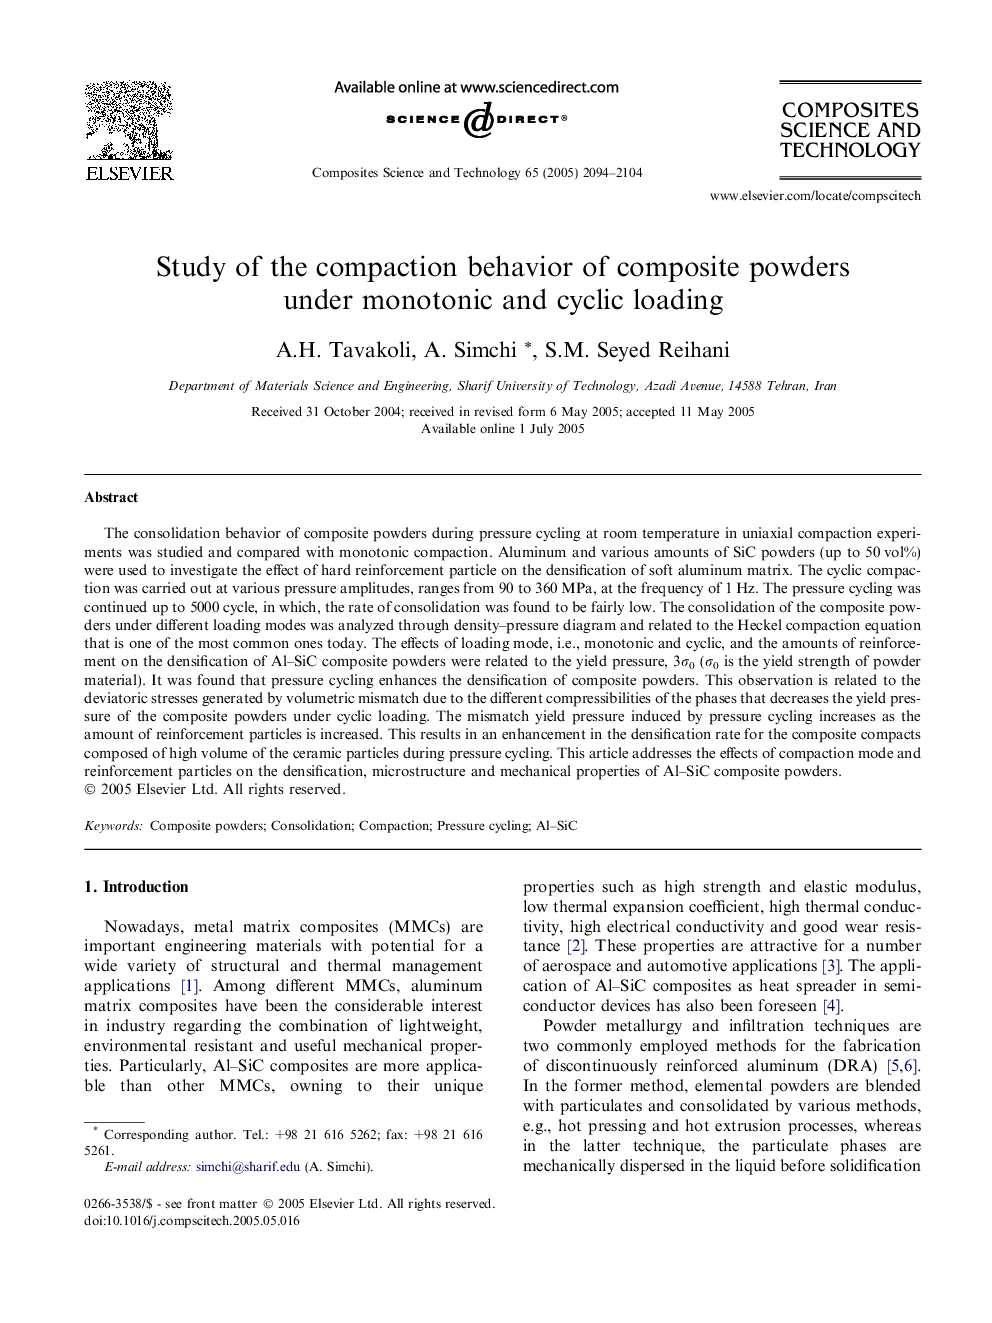 Study of the compaction behavior of composite powders under monotonic and cyclic loading